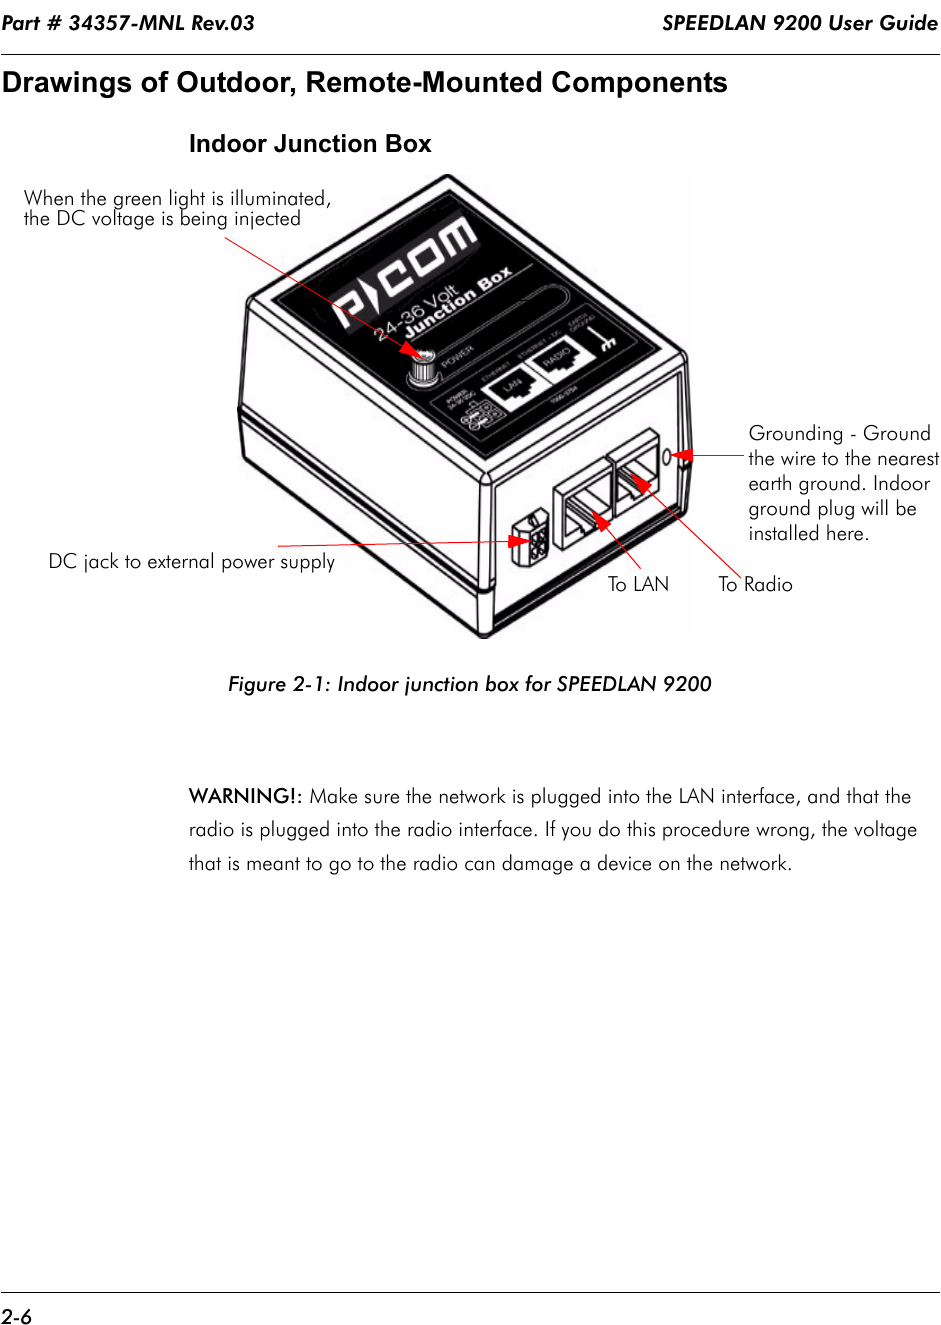 Part # 34357-MNL Rev.03                                                                  SPEEDLAN 9200 User Guide 2-6Drawings of Outdoor, Remote-Mounted ComponentsIndoor Junction Box Figure 2-1: Indoor junction box for SPEEDLAN 9200  WARNING!: Make sure the network is plugged into the LAN interface, and that the radio is plugged into the radio interface. If you do this procedure wrong, the voltage that is meant to go to the radio can damage a device on the network. When the green light is illuminated, the DC voltage is being injectedDC jack to external power supplyTo LAN To RadioGrounding - Groundthe wire to the nearestearth ground. Indoorground plug will be installed here.